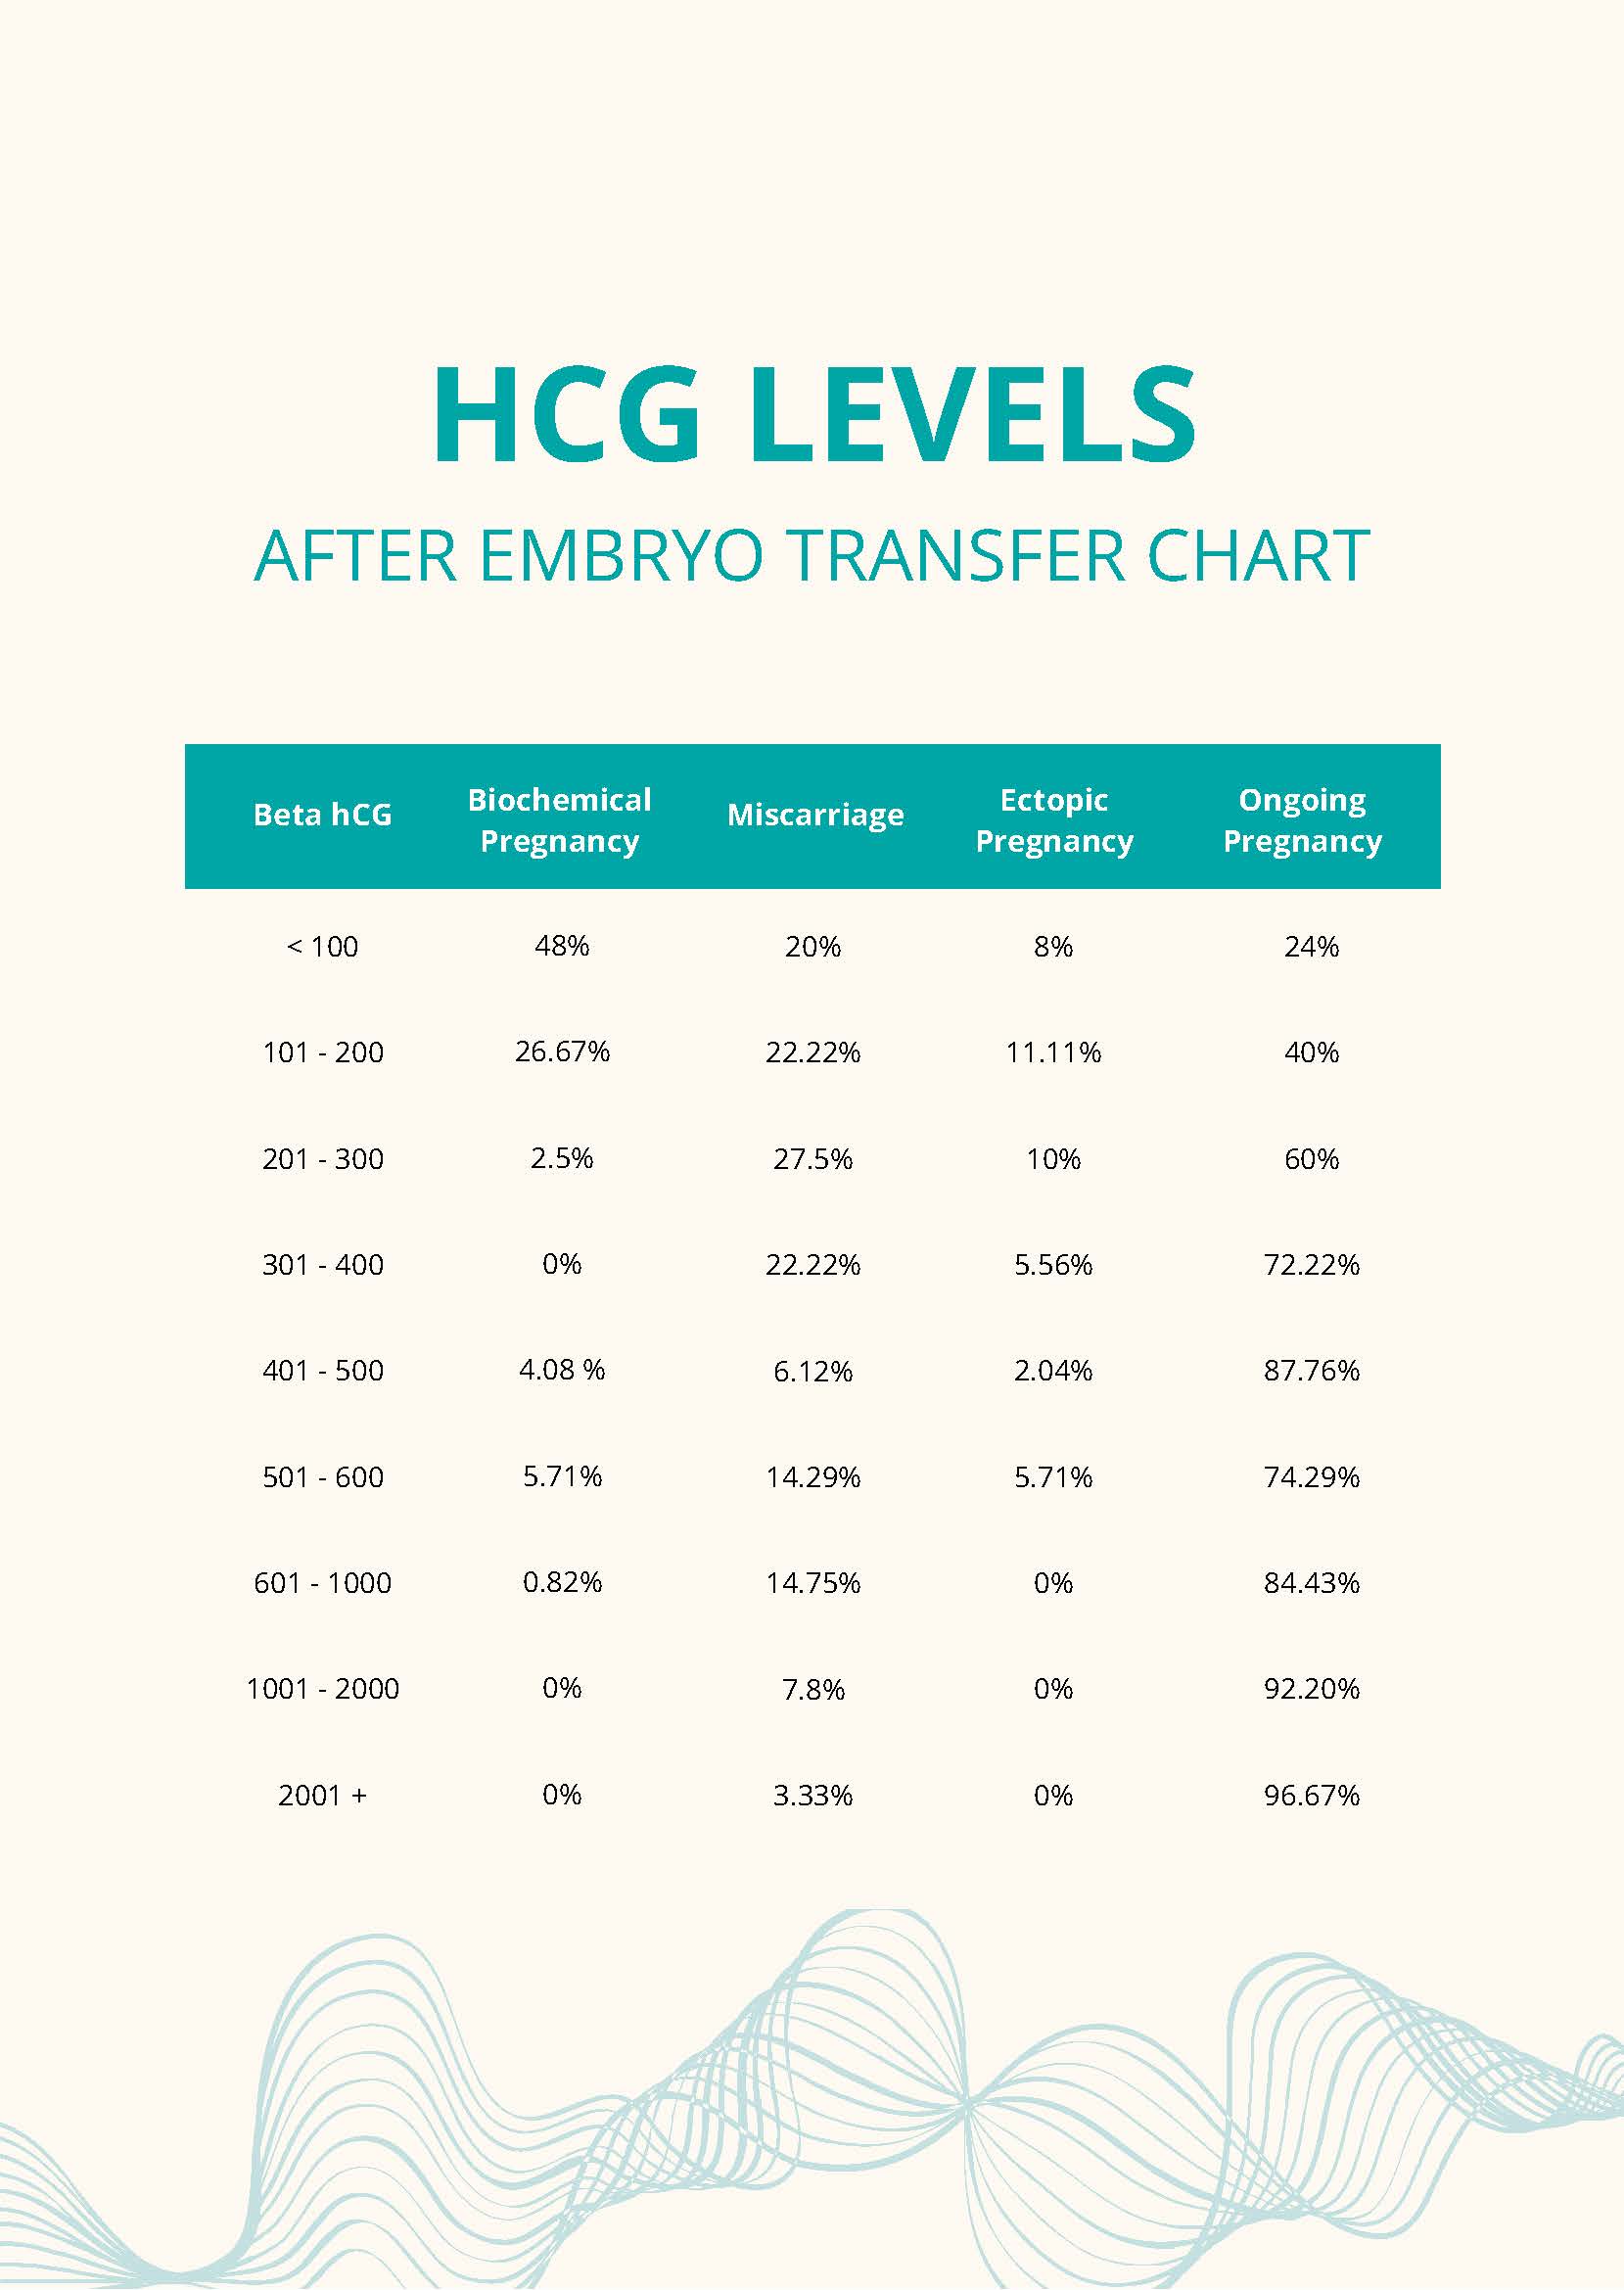 HCG Levels After Embryo Transfer Chart in PDF